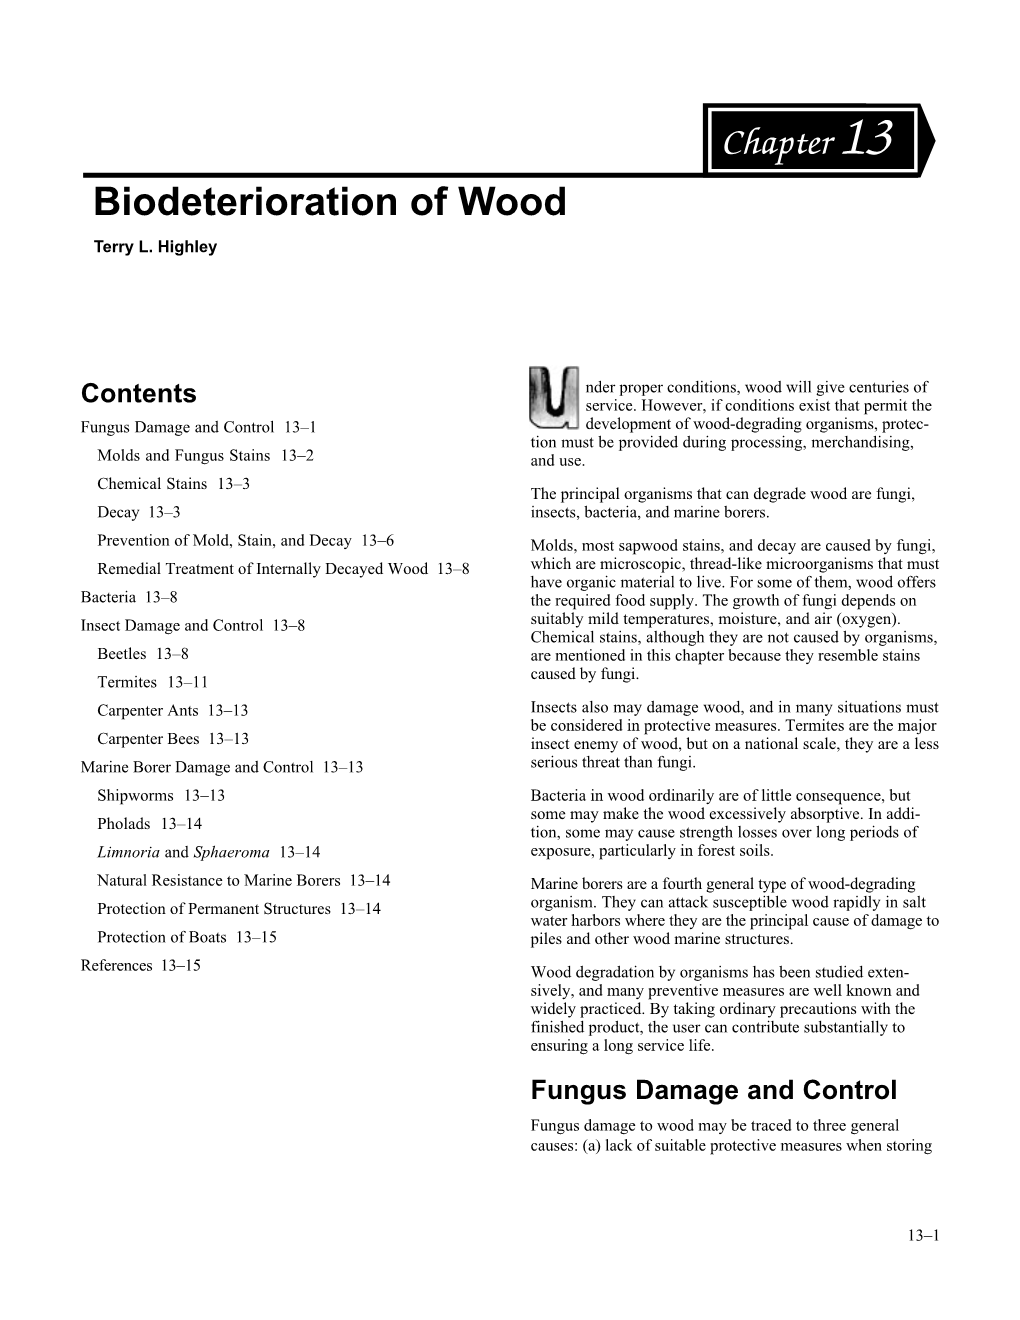 Biodeterioration of Wood Chapter 13